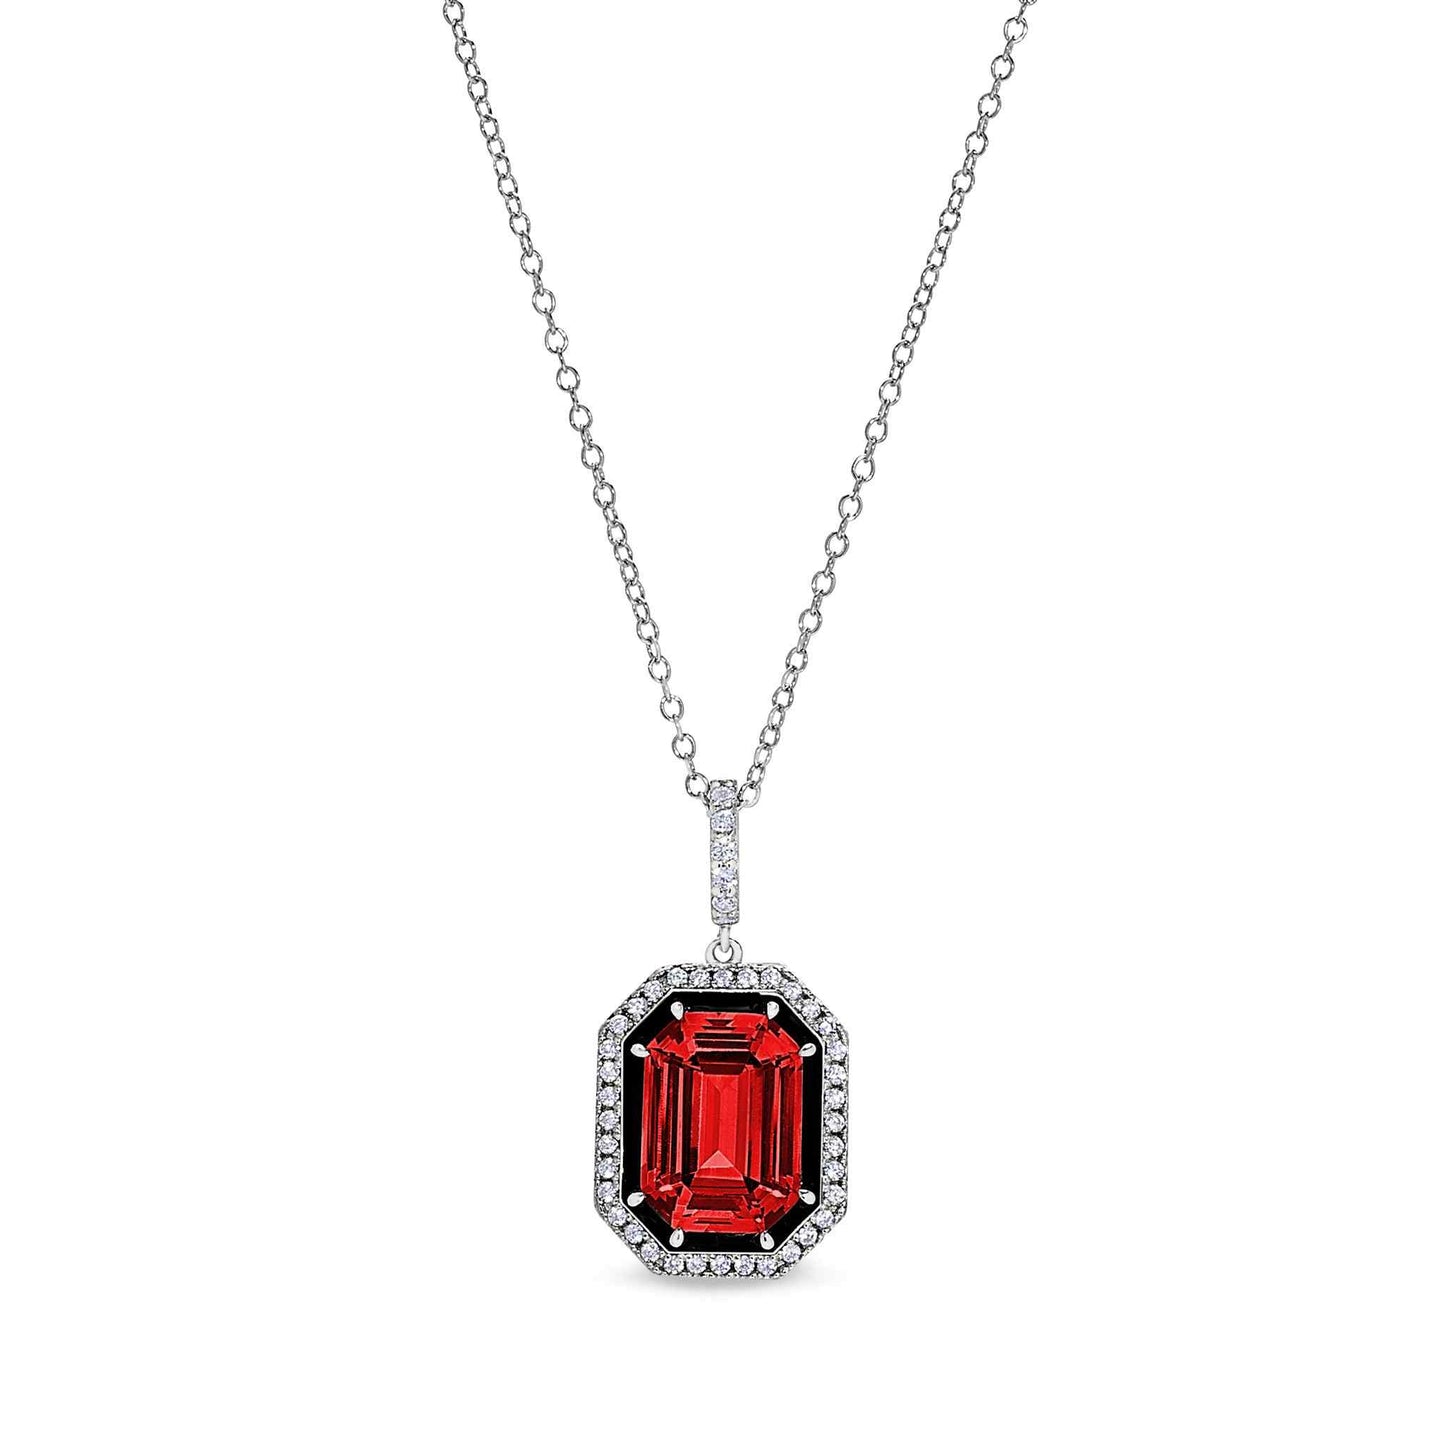 A black enamel & simulated ruby octagon pendant with simulated diamonds displayed on a neutral white background.